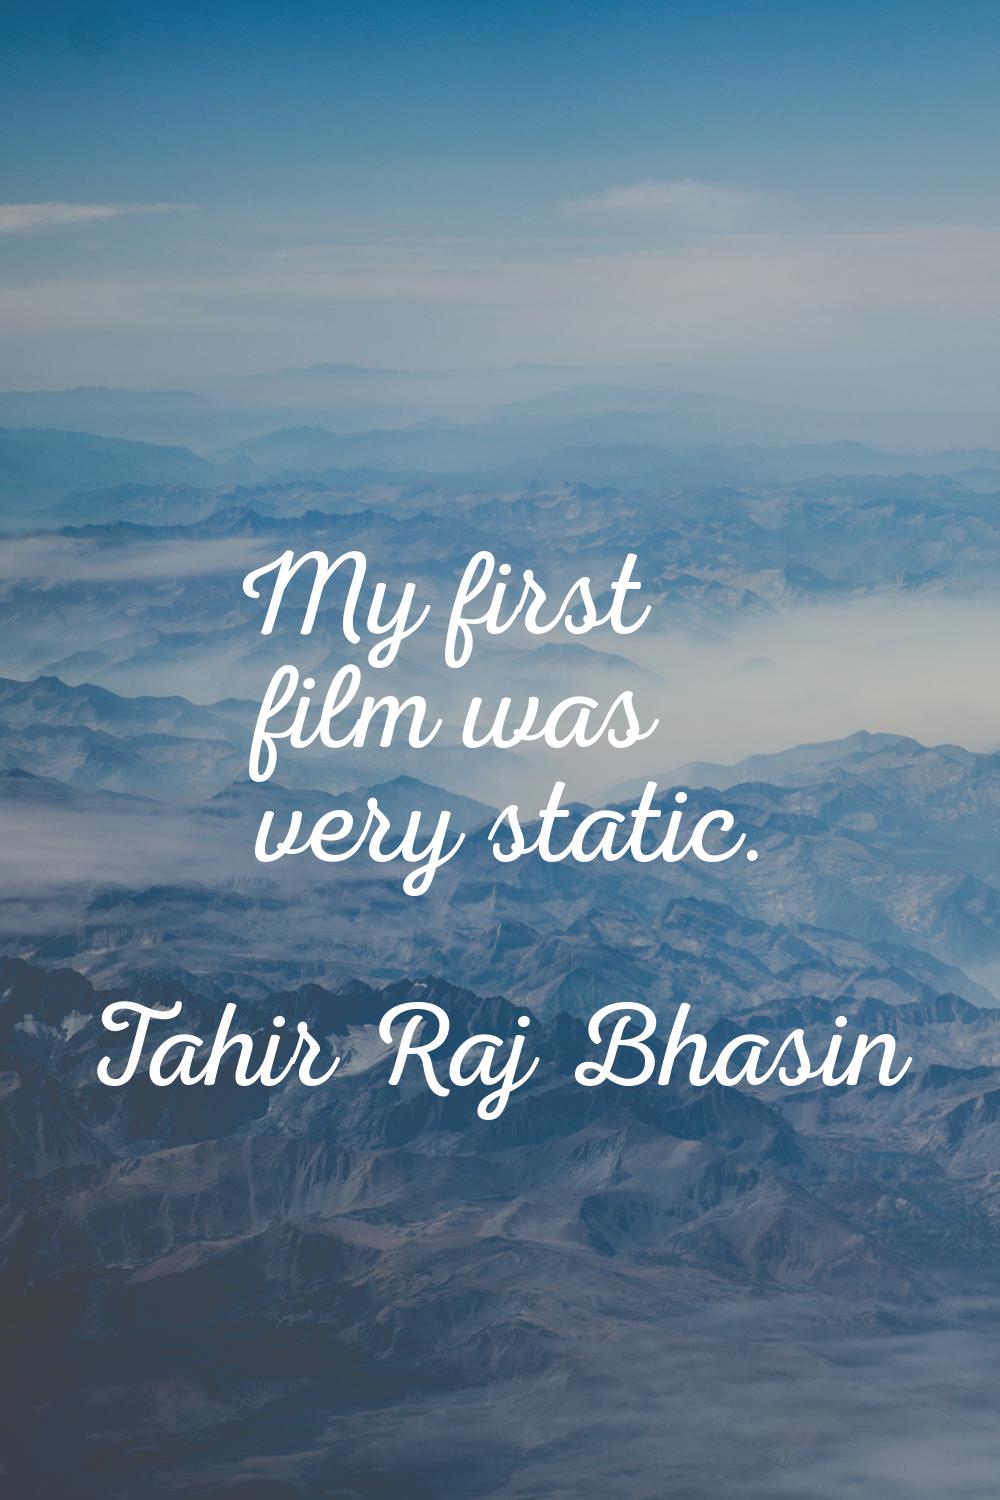 My first film was very static.